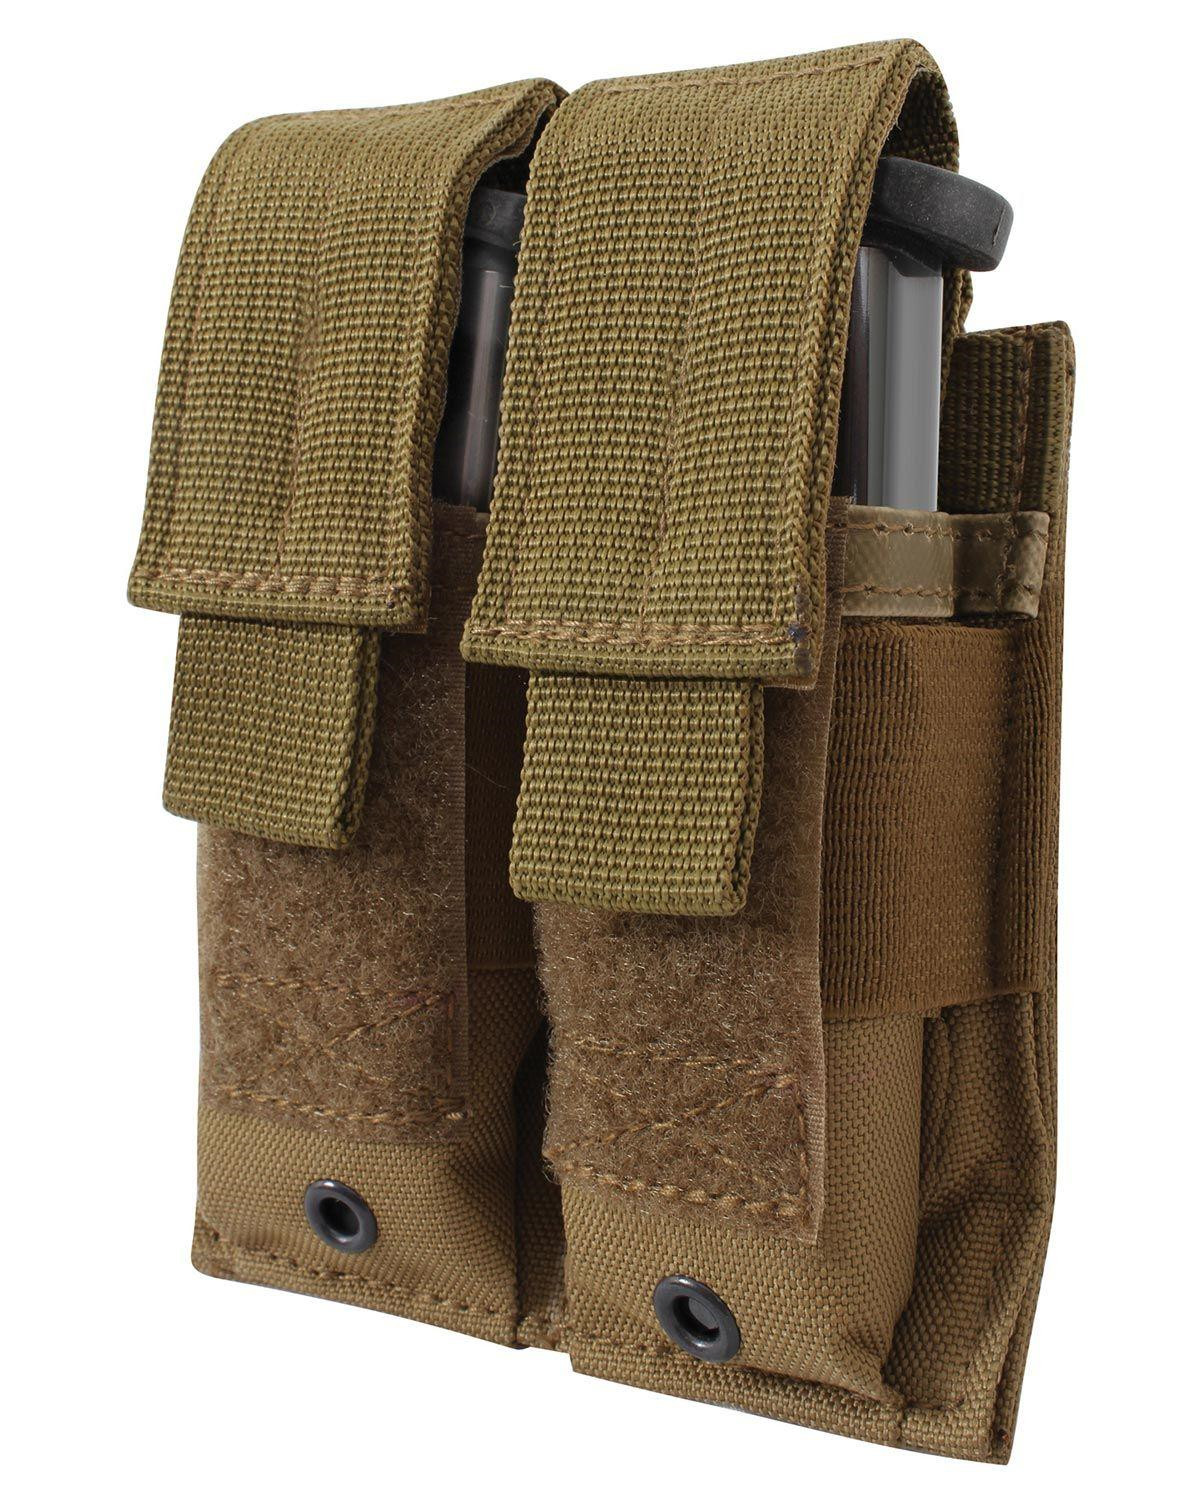 Rothco Double Pistol Pouch - Molle (Coyote Brun, One Size)